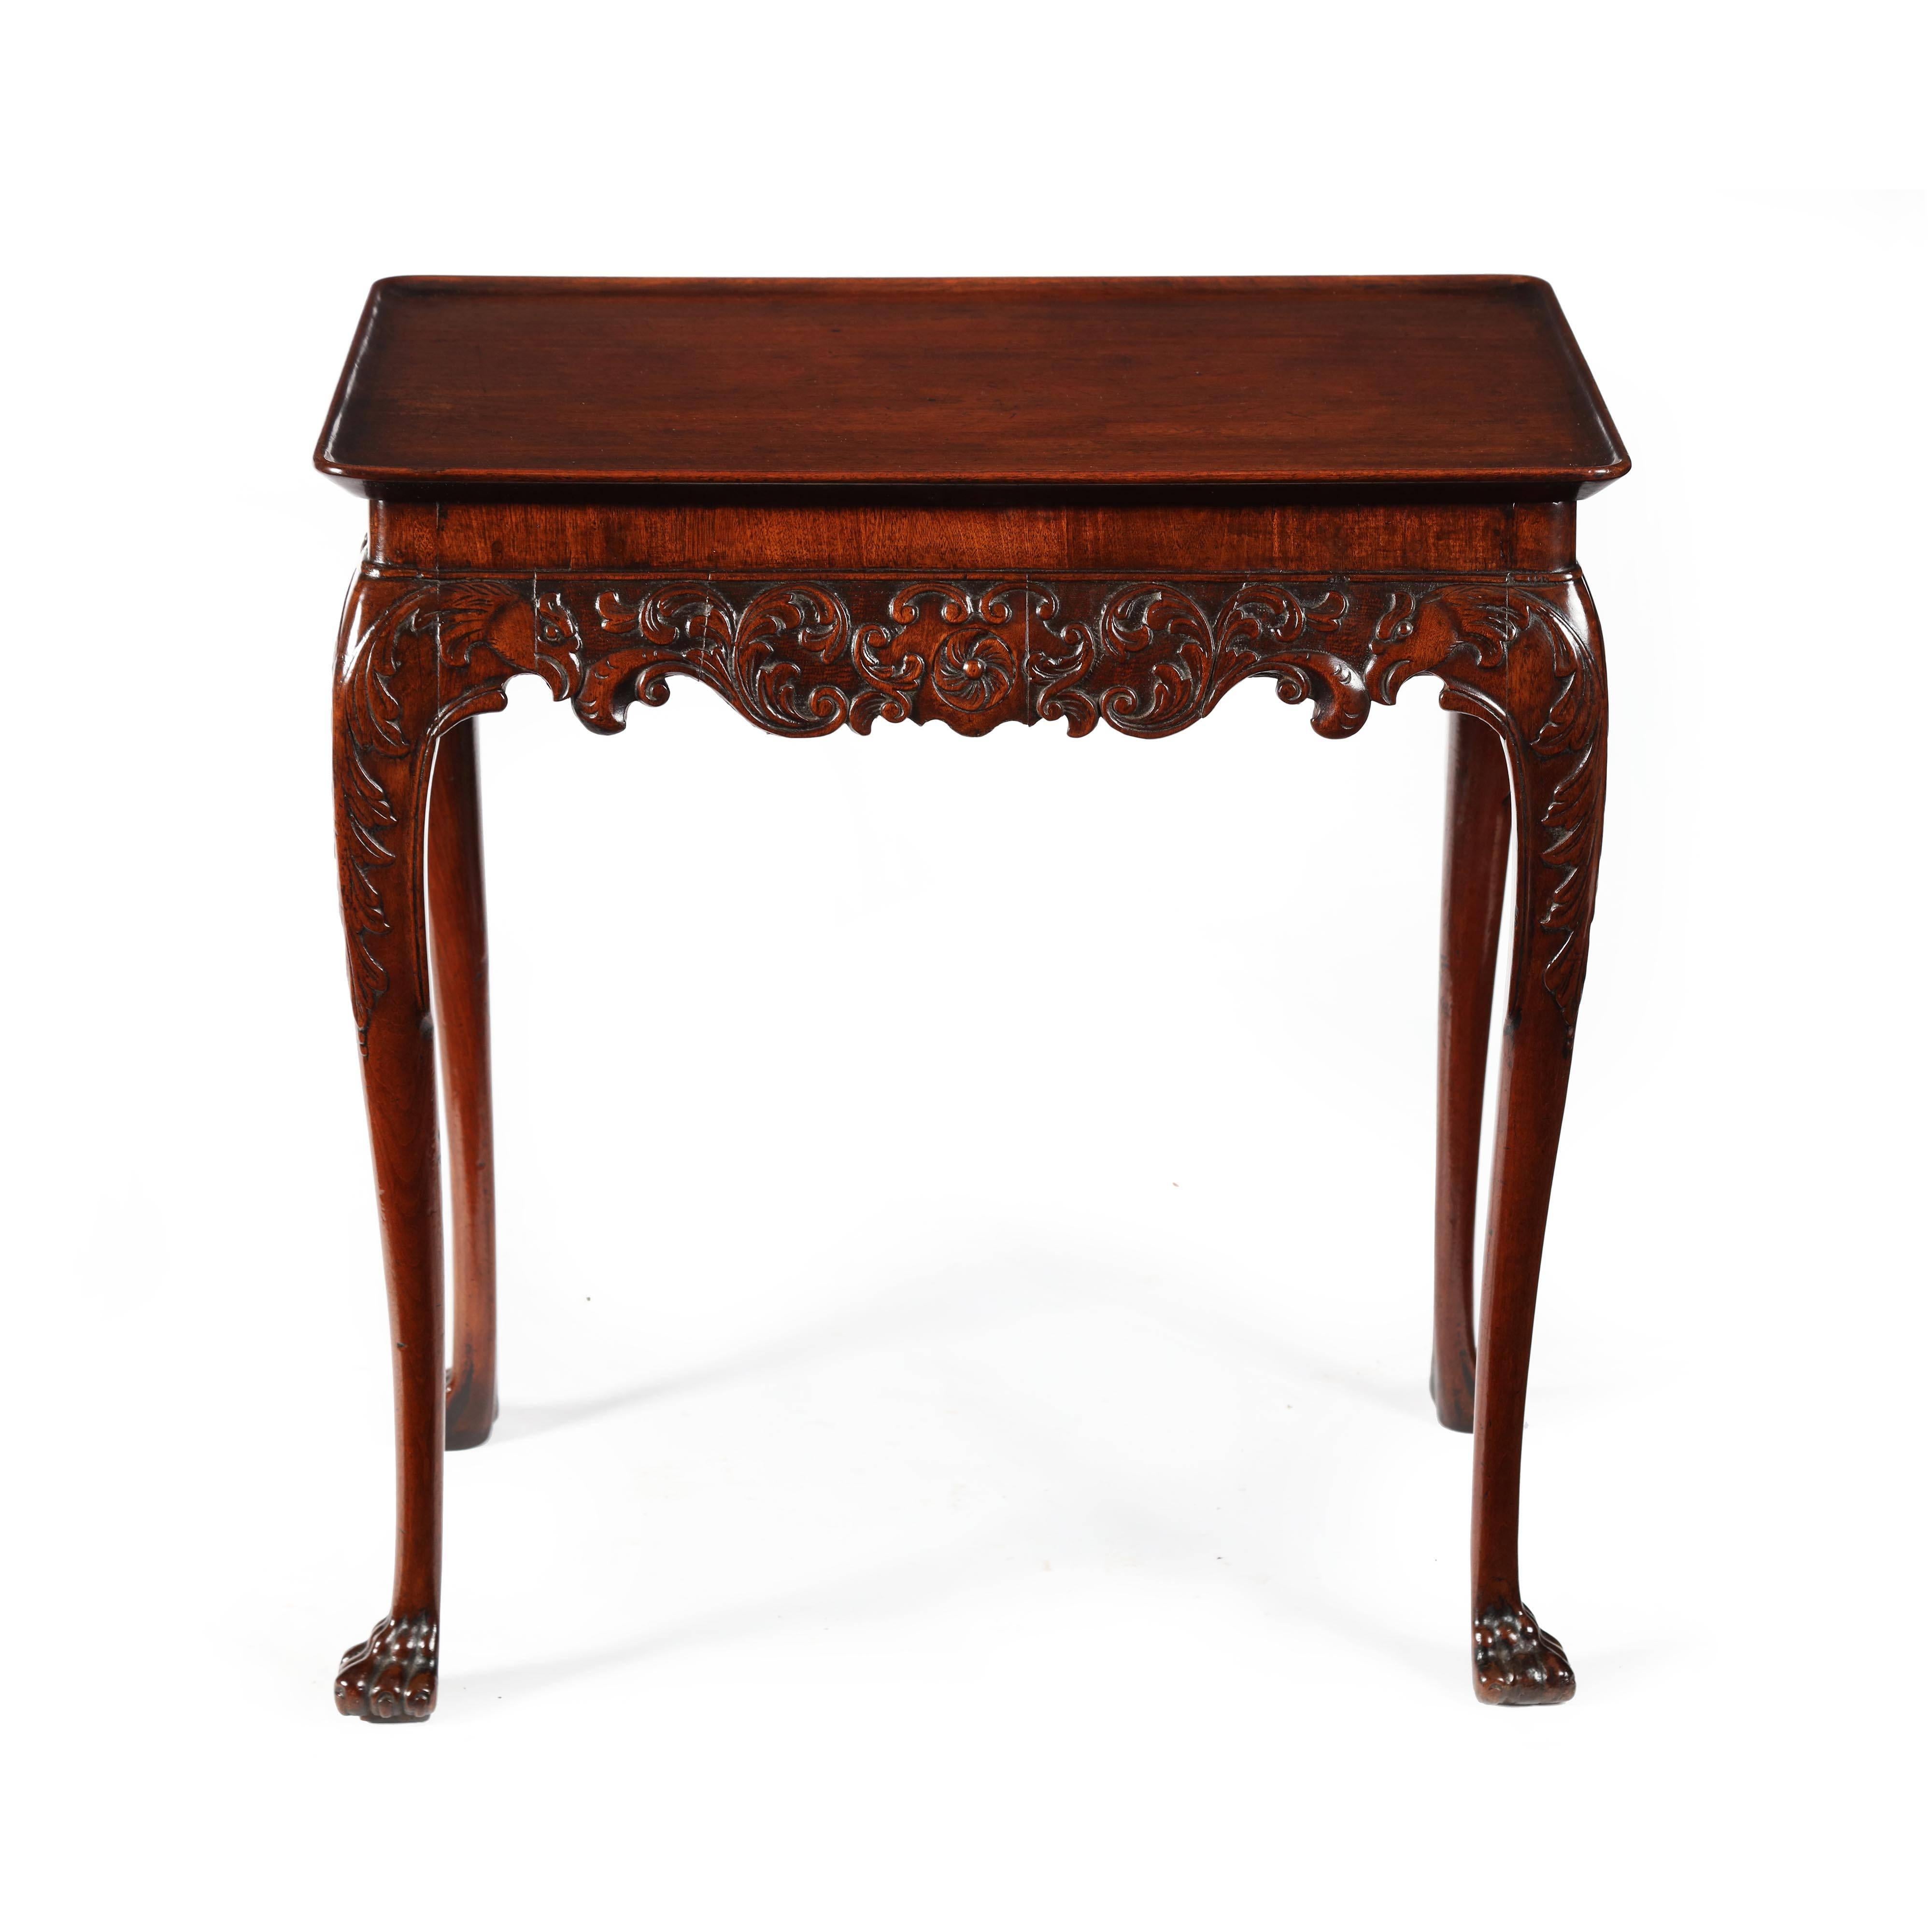 A superb George II Cuban mahogany carved Irish silver table of compact proportions. The solid mahogany, rectangular top with carved dished lip around the perimeter. The scrolling profusely carved with a central flower bordered by trailing carved